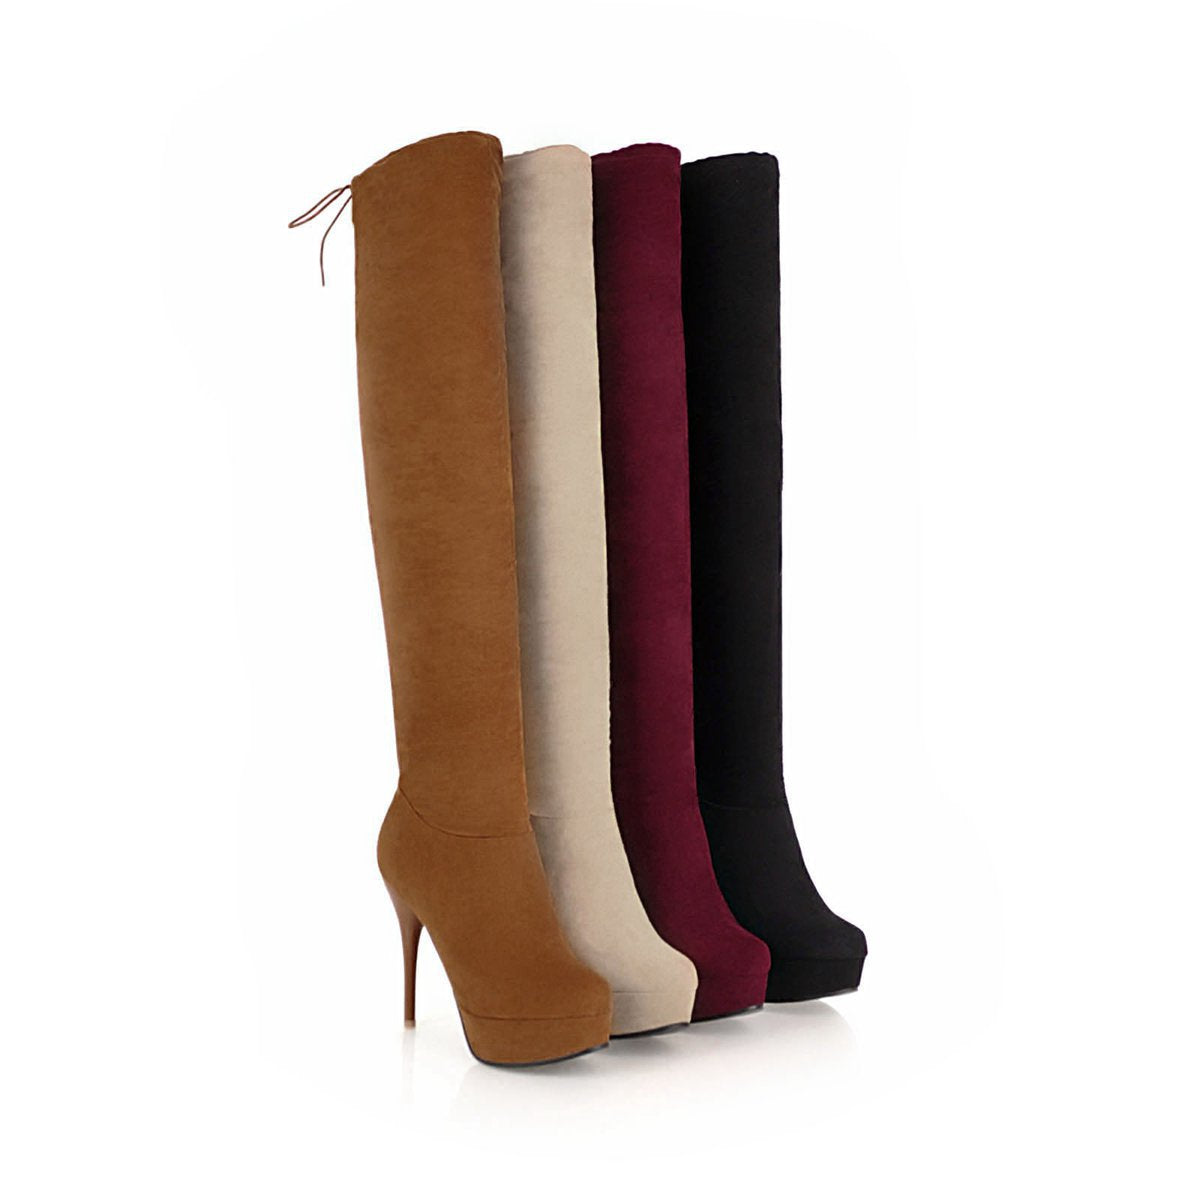 Faux Suede Stiletto Heel Over the Knee Boots Winter Shoes for Woman 6896